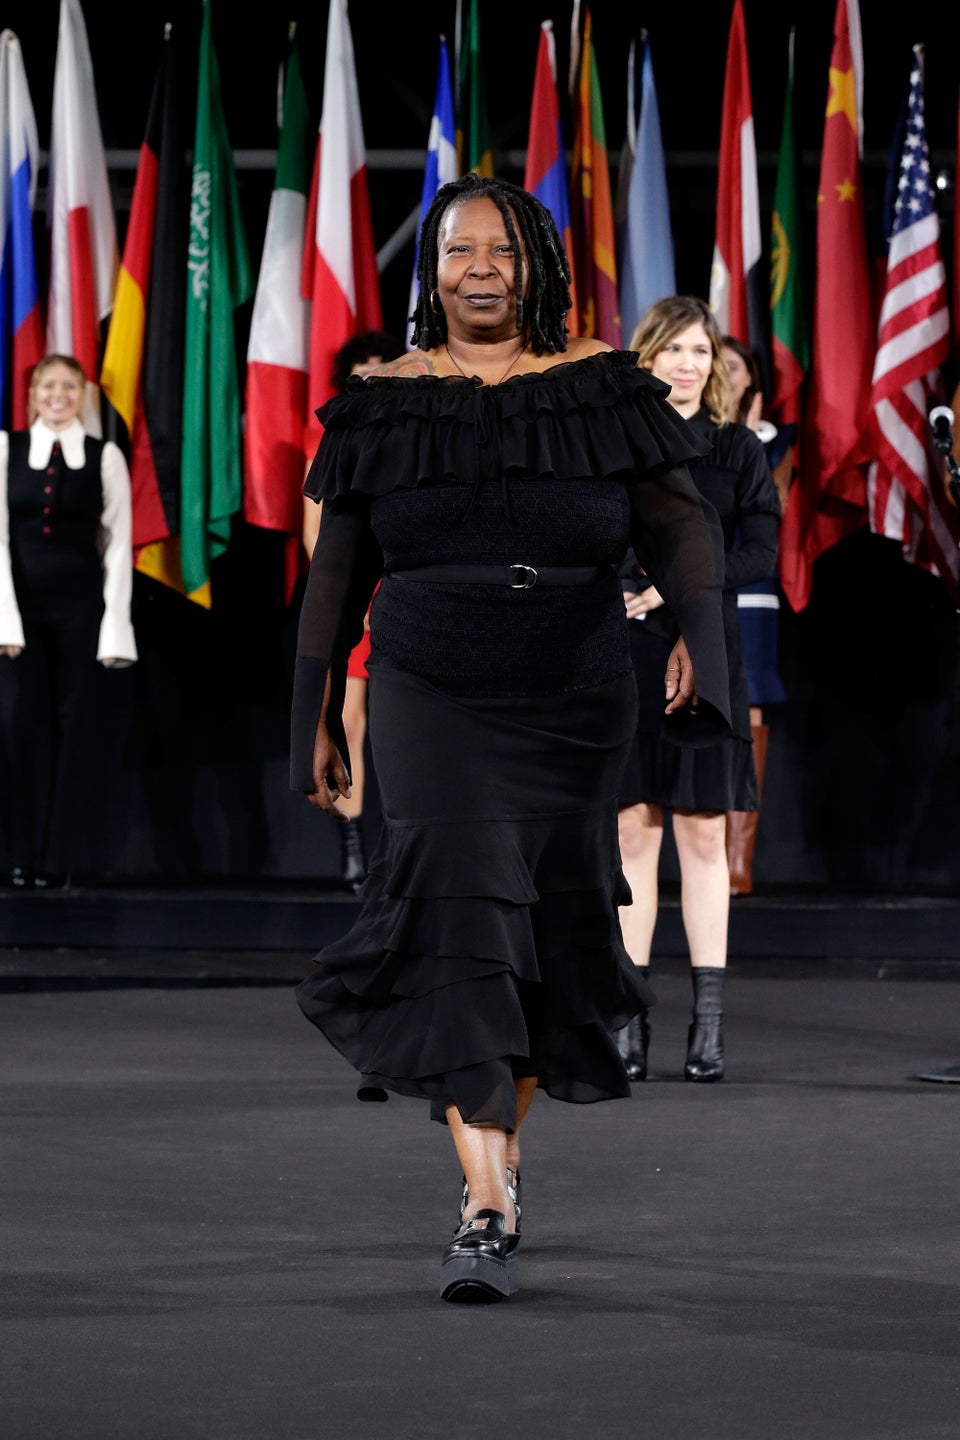 Whoopi Goldberg Walks in Opening Ceremony Show